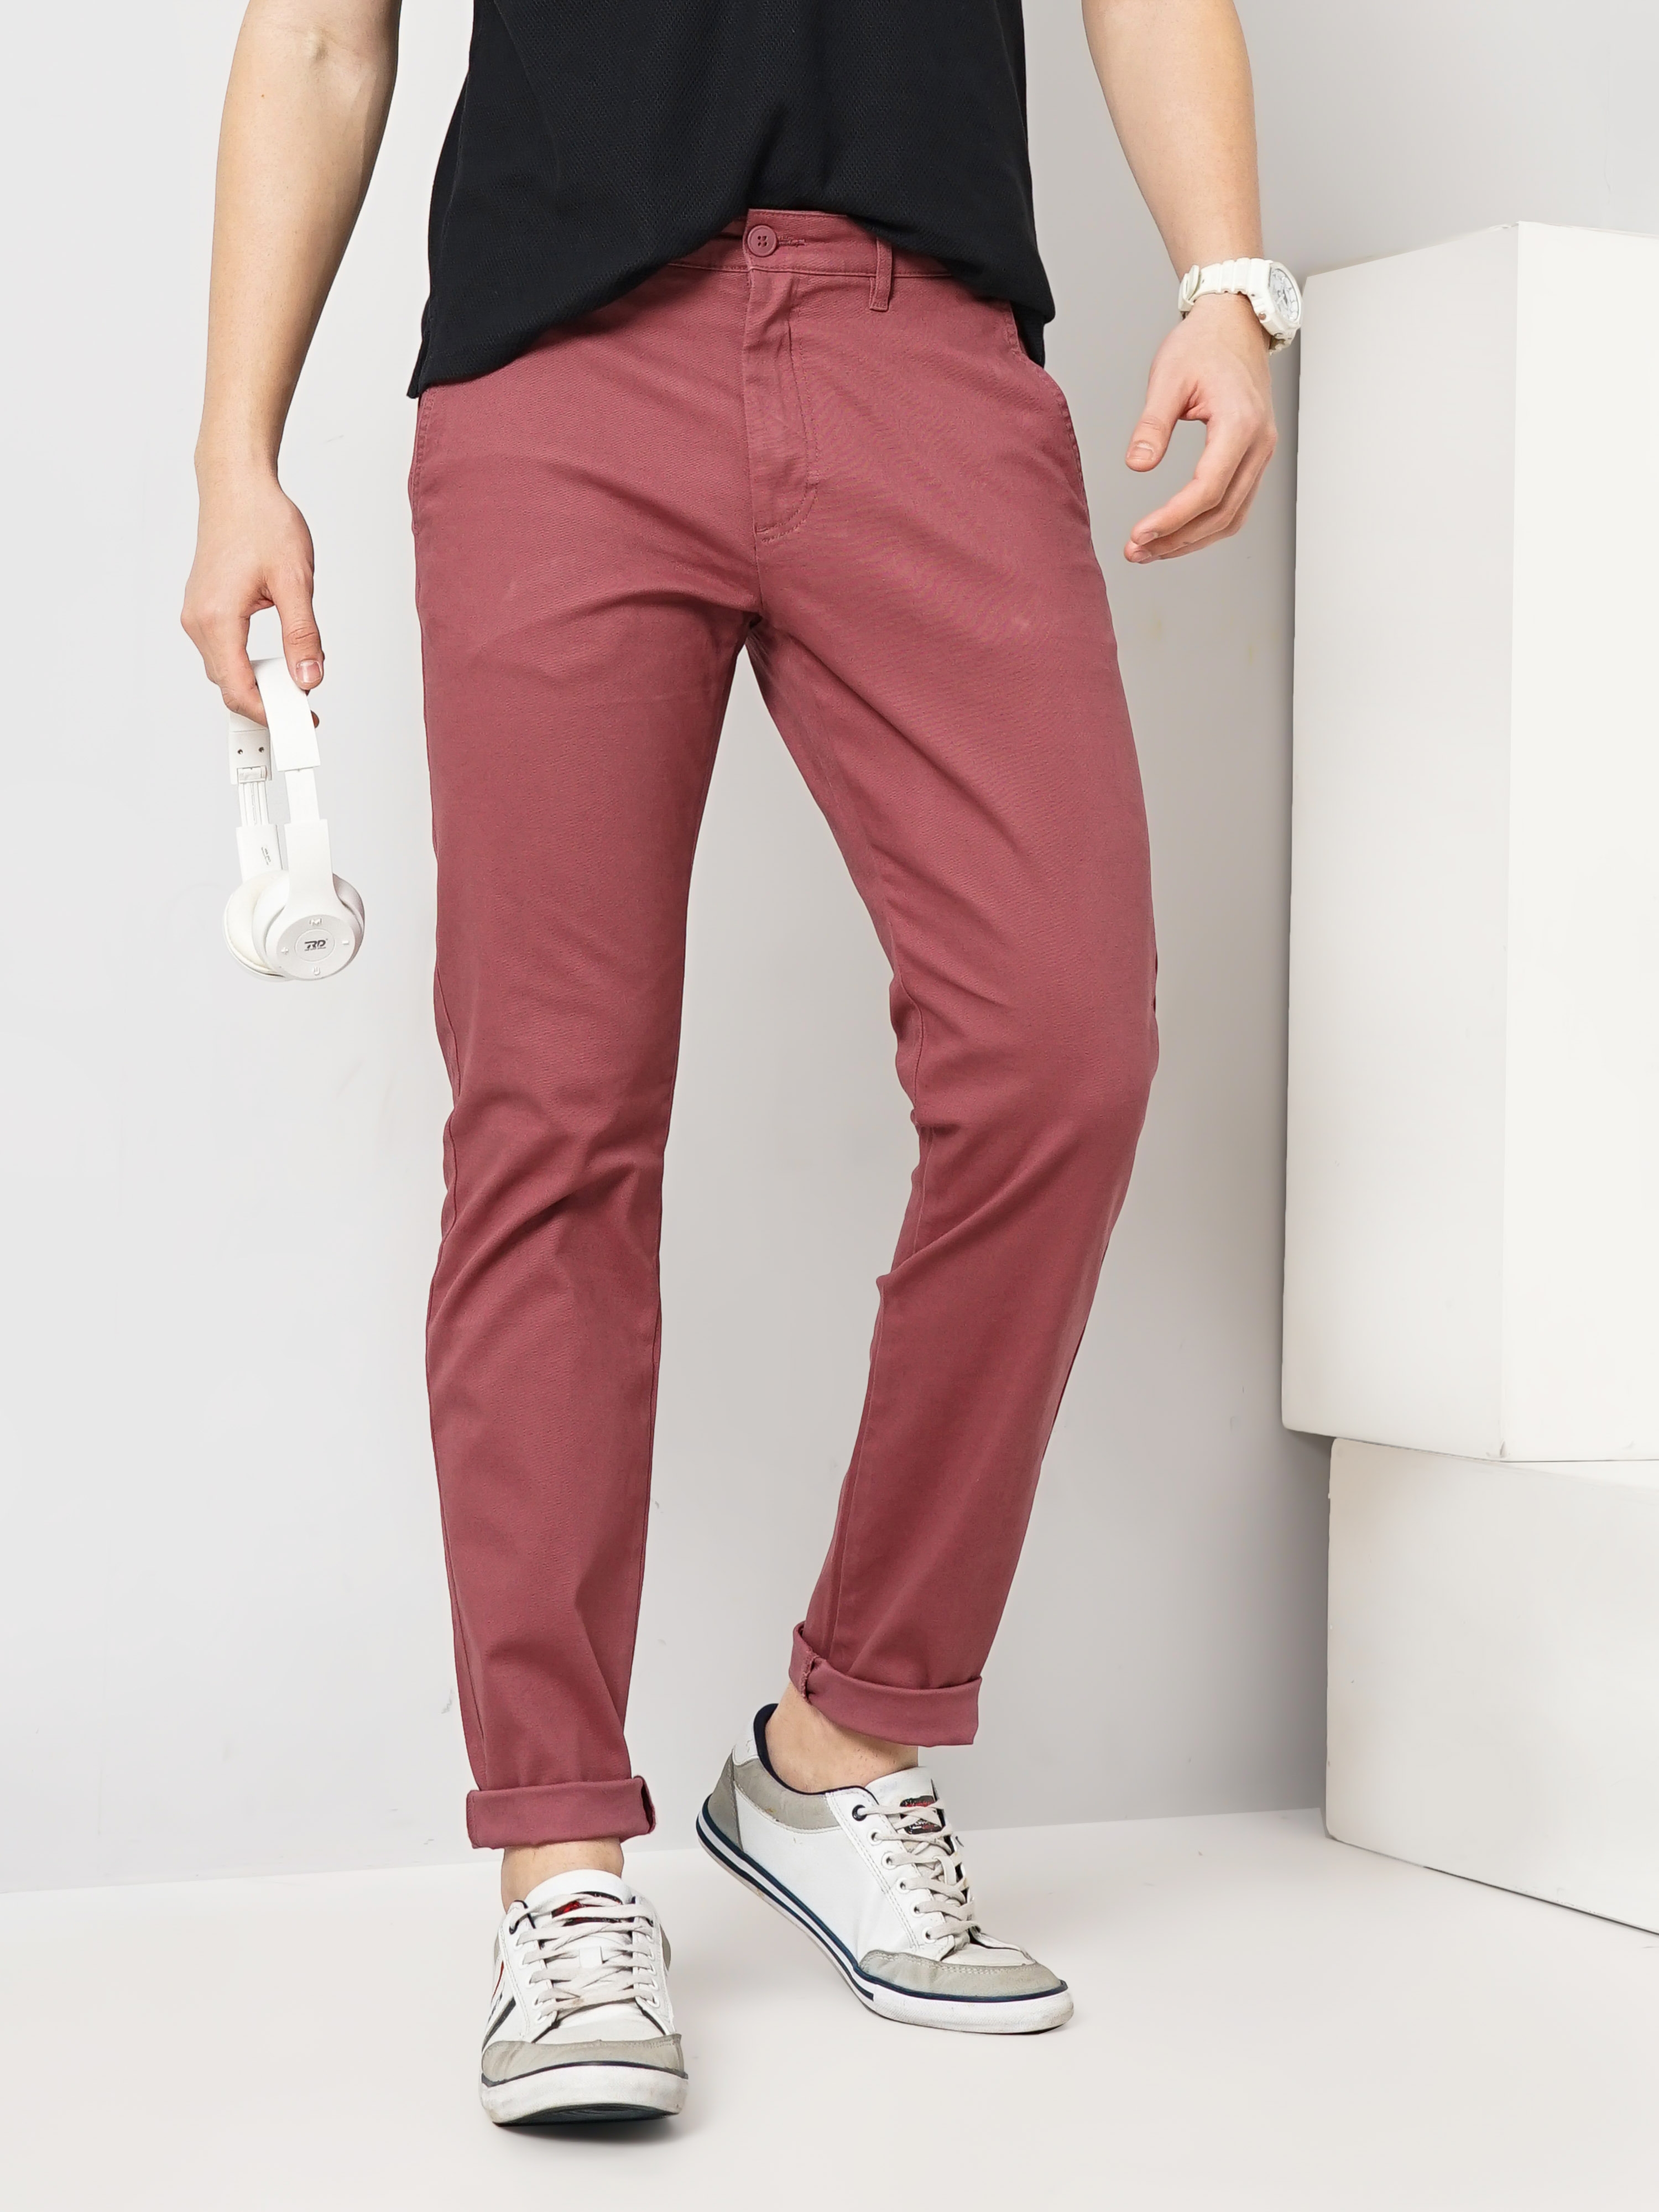 Season Men's Trend Casual Pants Men's Straight Trousers Youth New Business  Trousers Slim… | Mens casual outfits summer, Men fashion casual shirts, Mens  pants casual